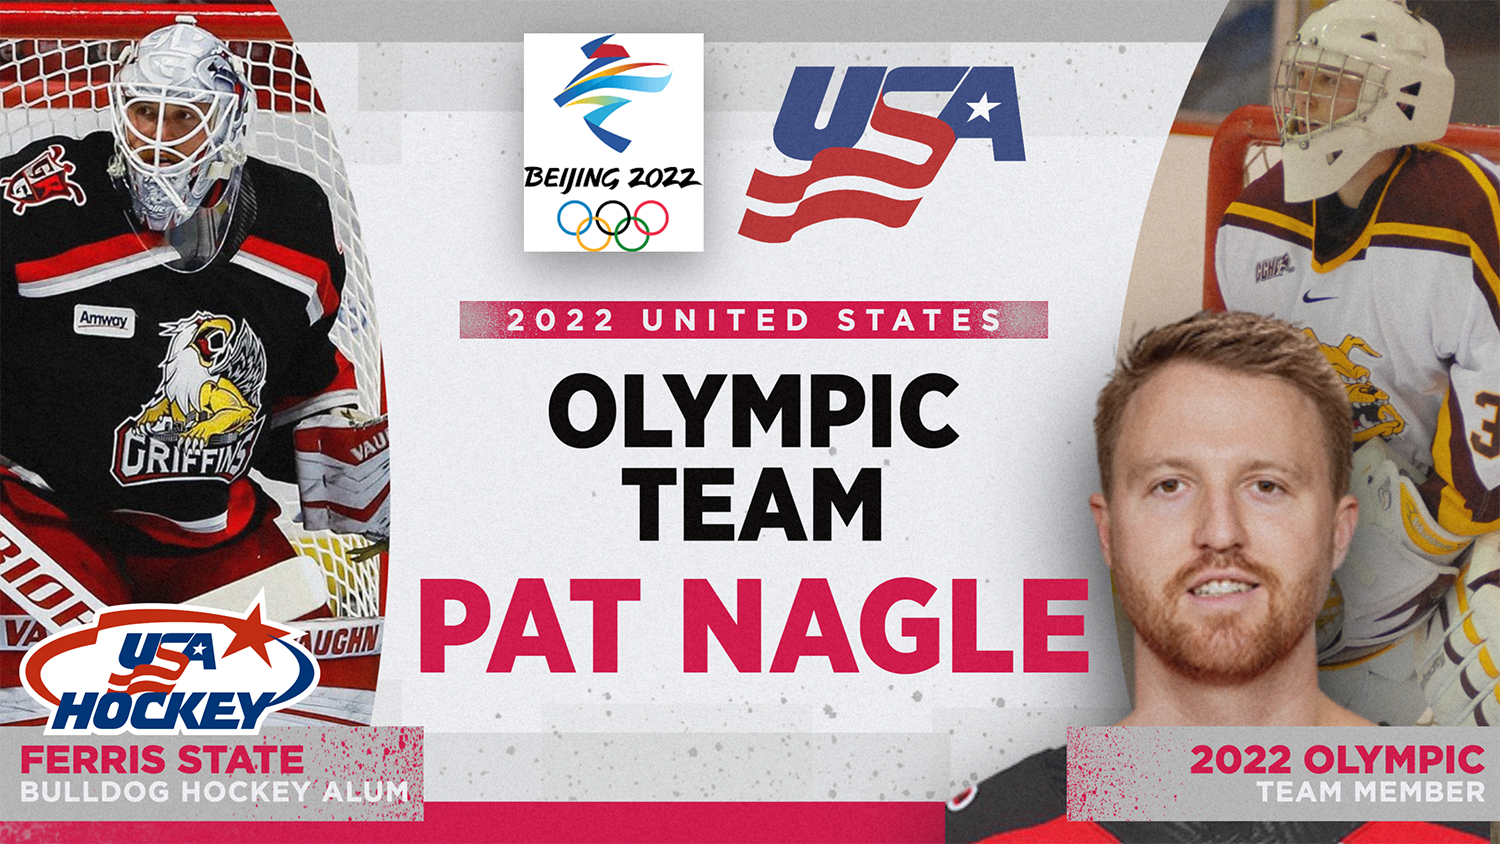 Ferris State Alum Pat Nagle Named To 2022 United States Olympic Team